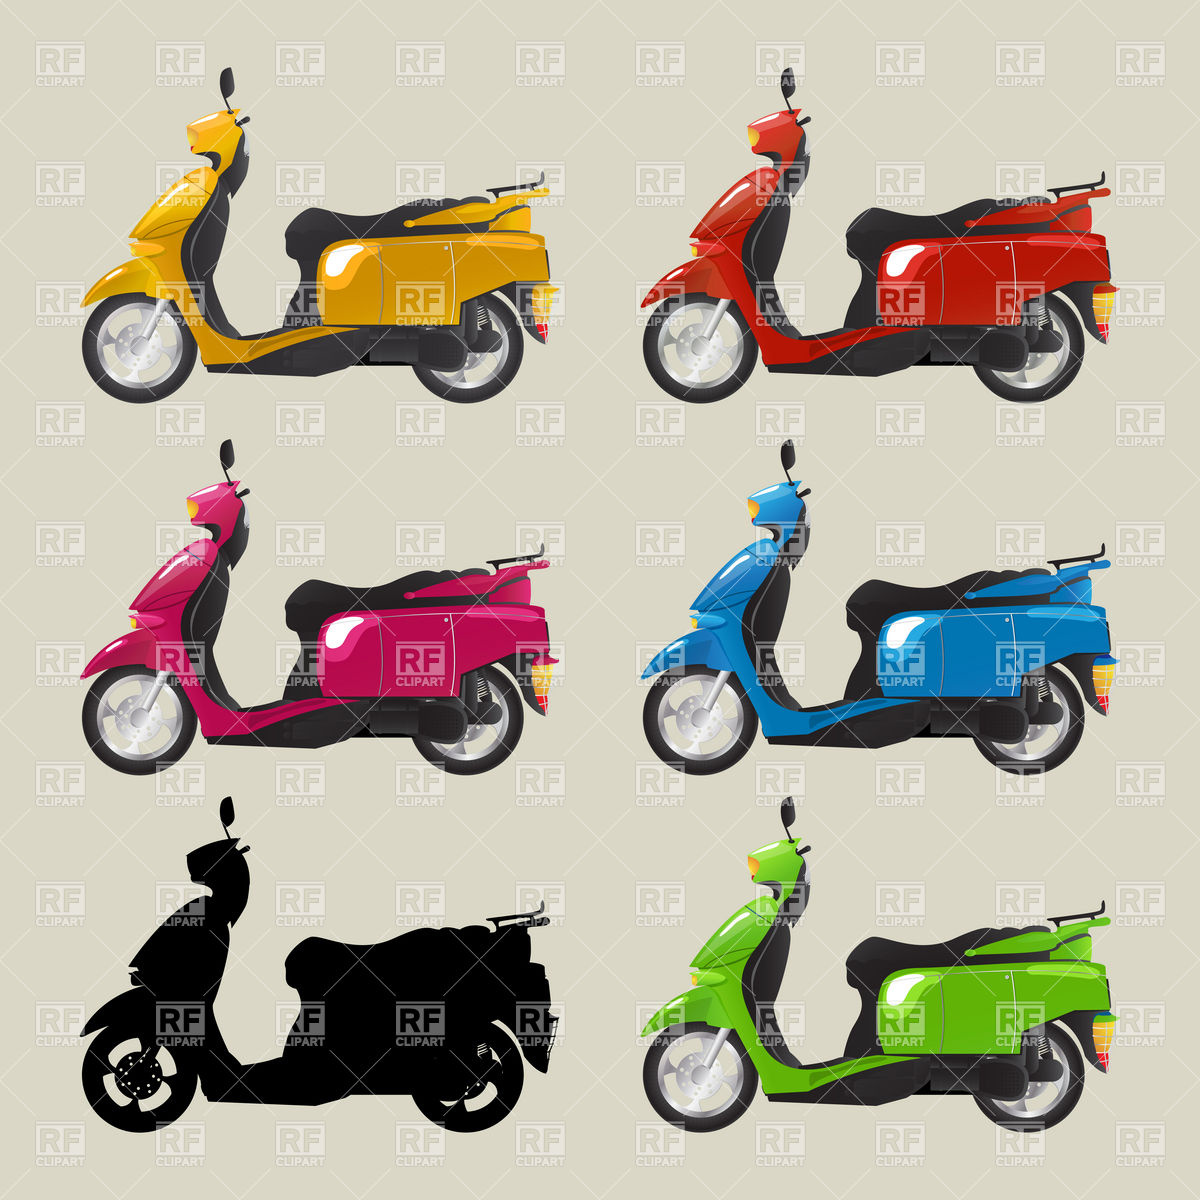 Retro Motor Scooter In Colors And Silhouette 6755 Download Royalty